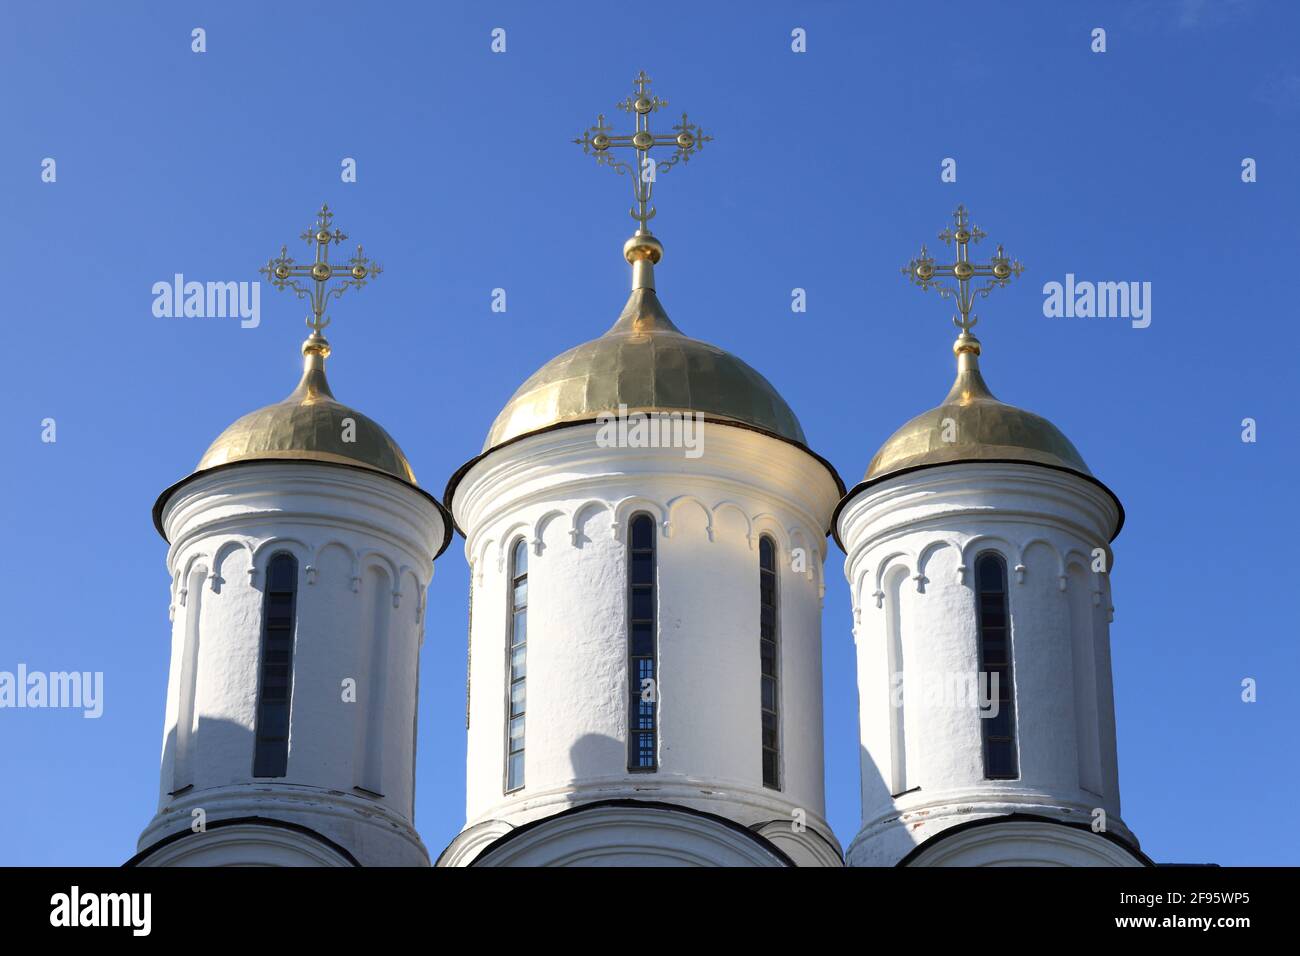 Cupola of Cathedral of the Transfiguration in Yaroslavl, Russia Stock Photo